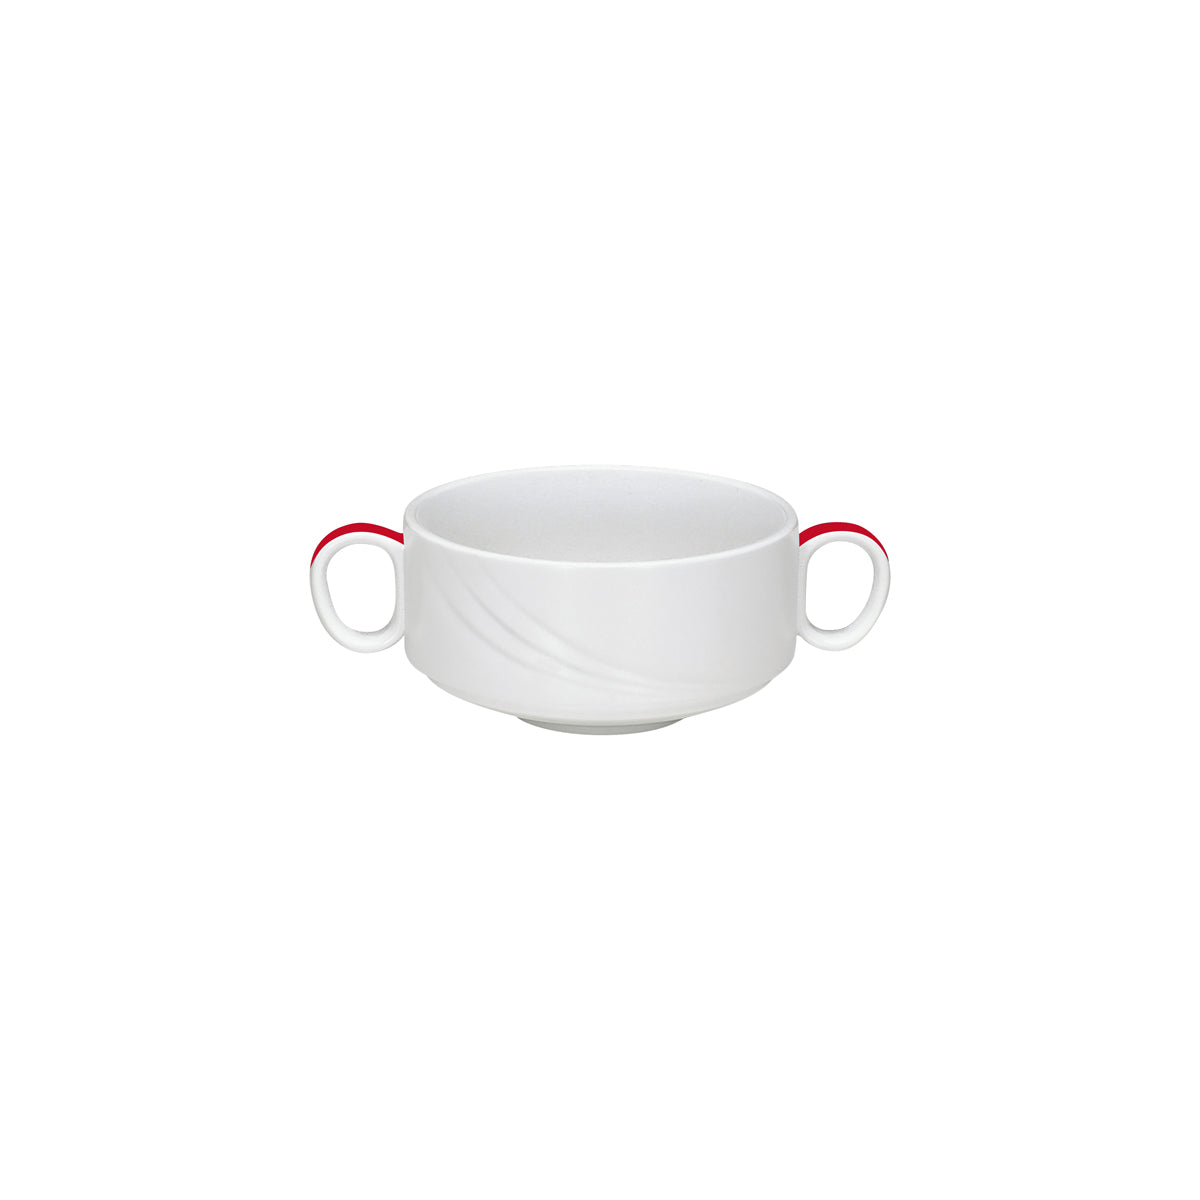 SH9182740/62931 Donna Senior Decor Stackable Soup Cup with 2 Handles with Red Band 108x66mm / 480ml Tomkin Australia Hospitality Supplies